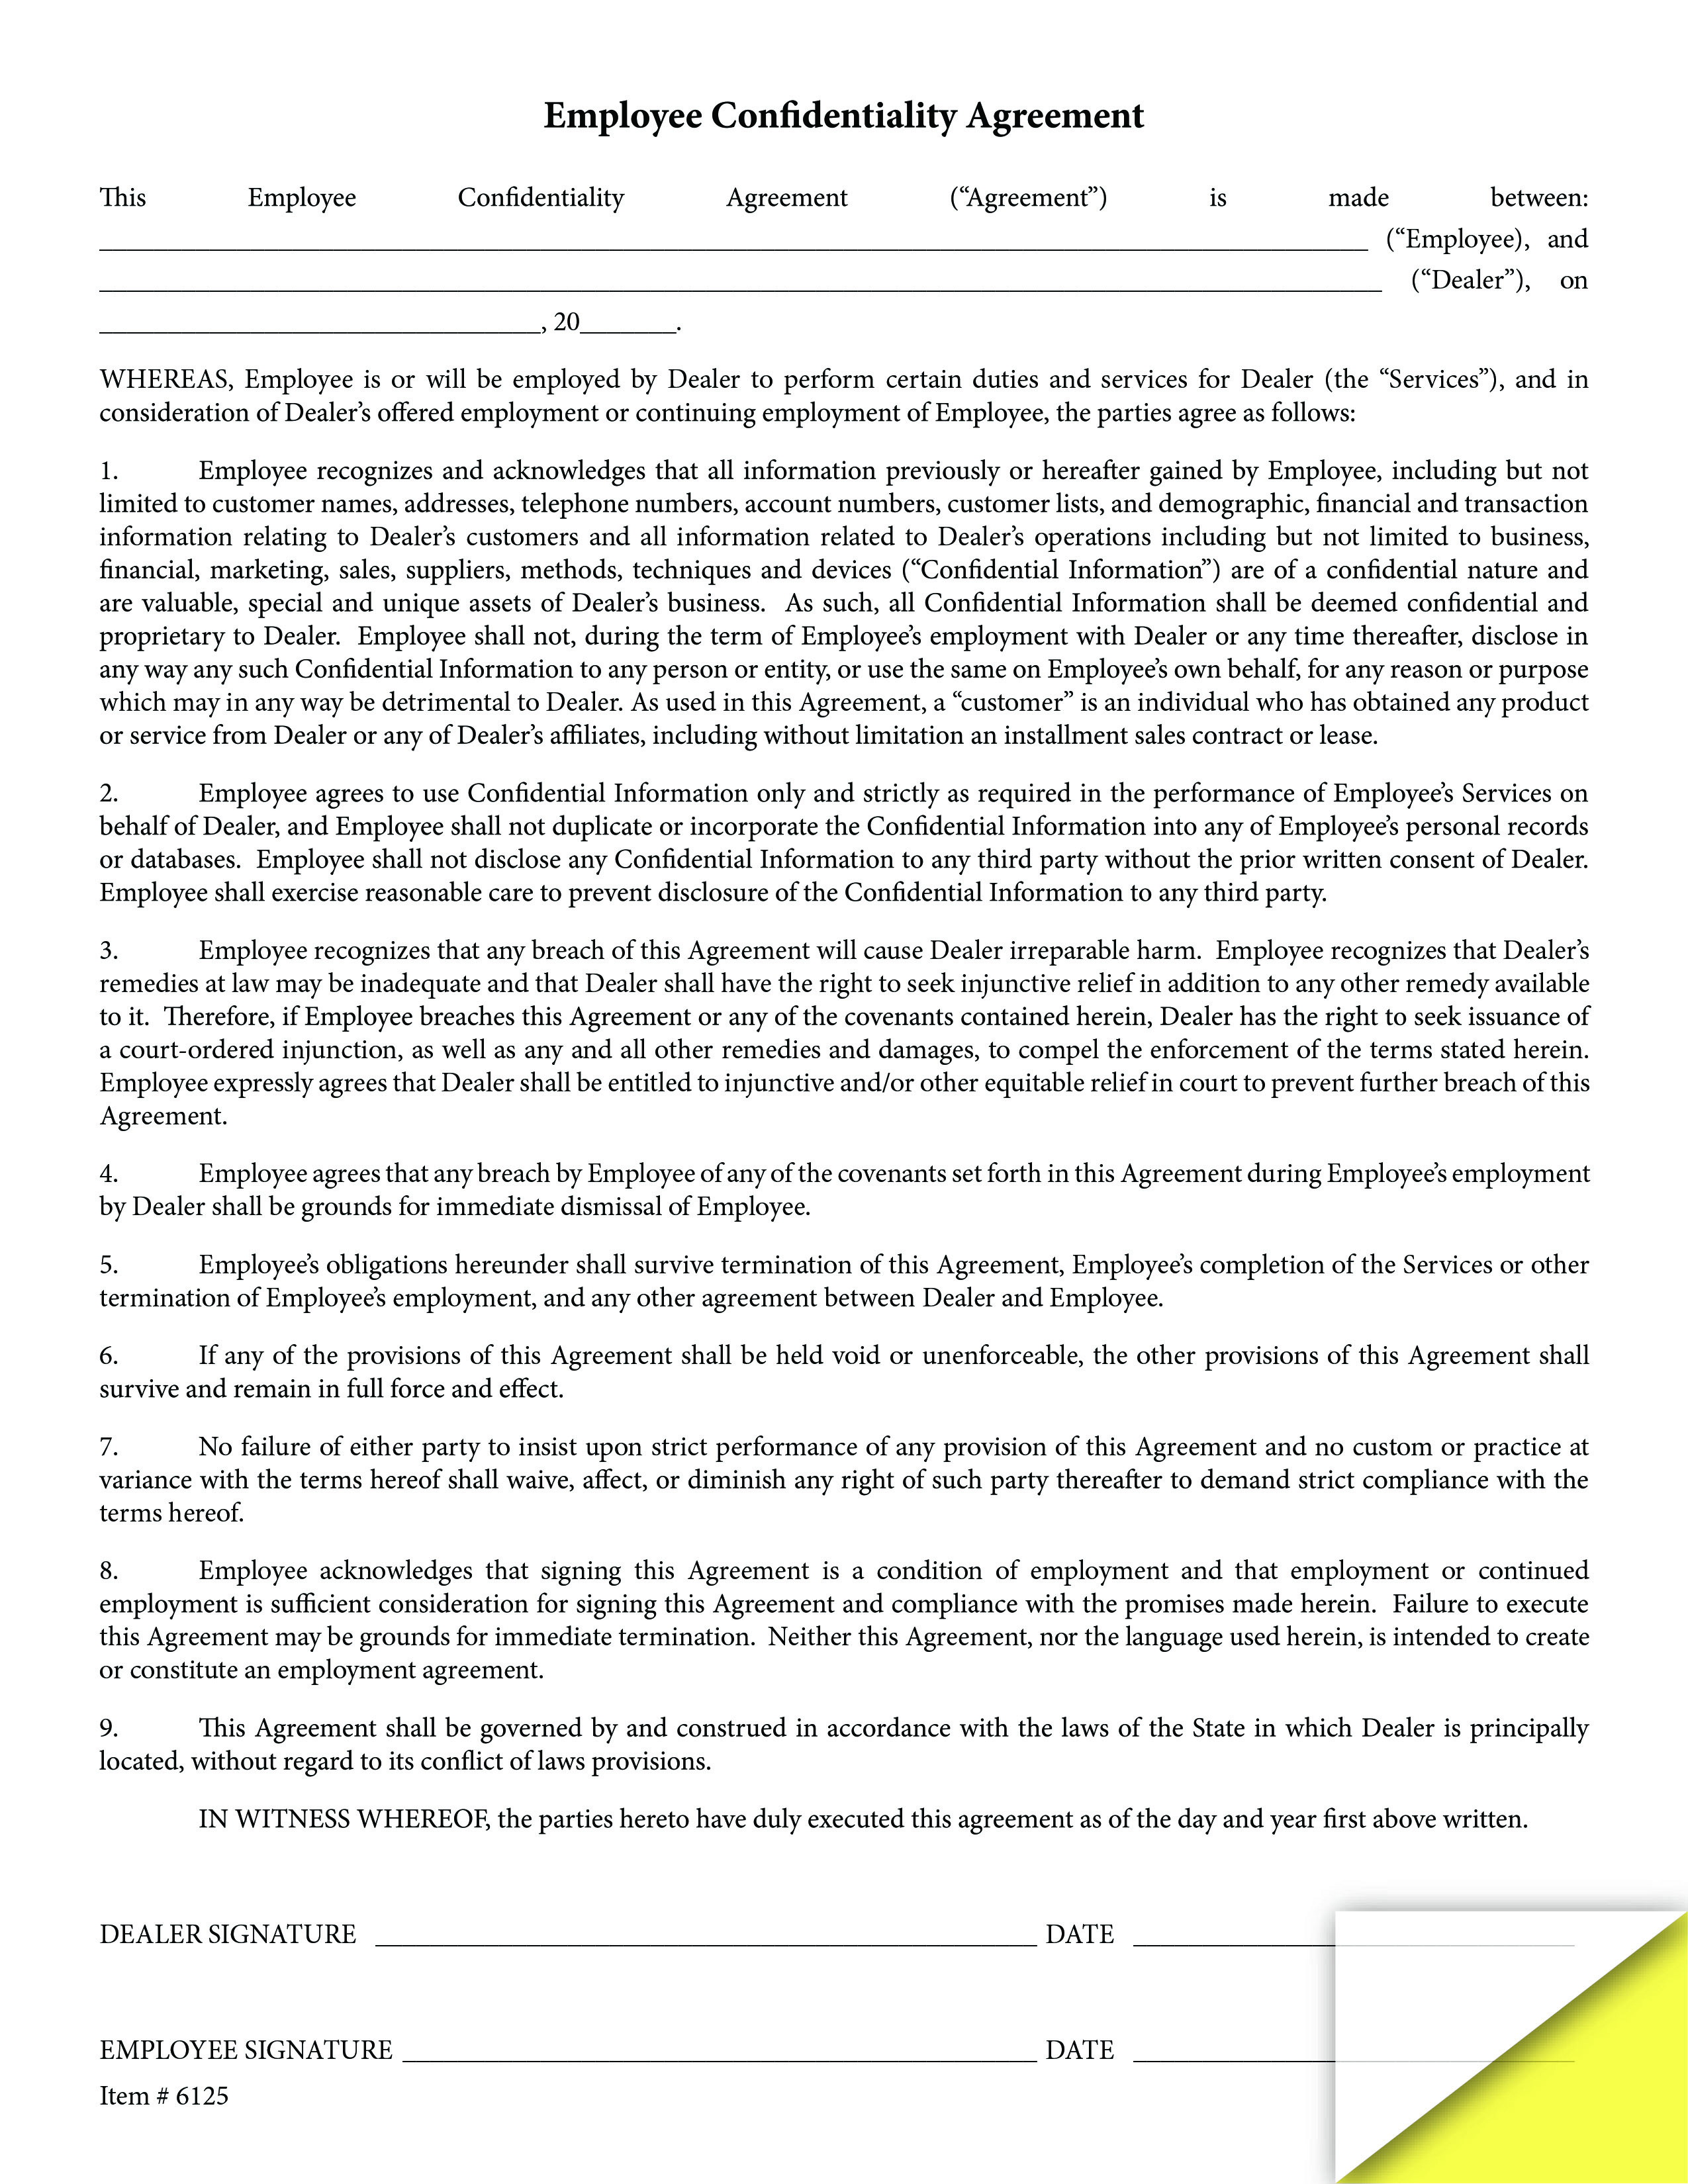 Employee Confidentiality Agreement Form Employee Confidentiality Agreement